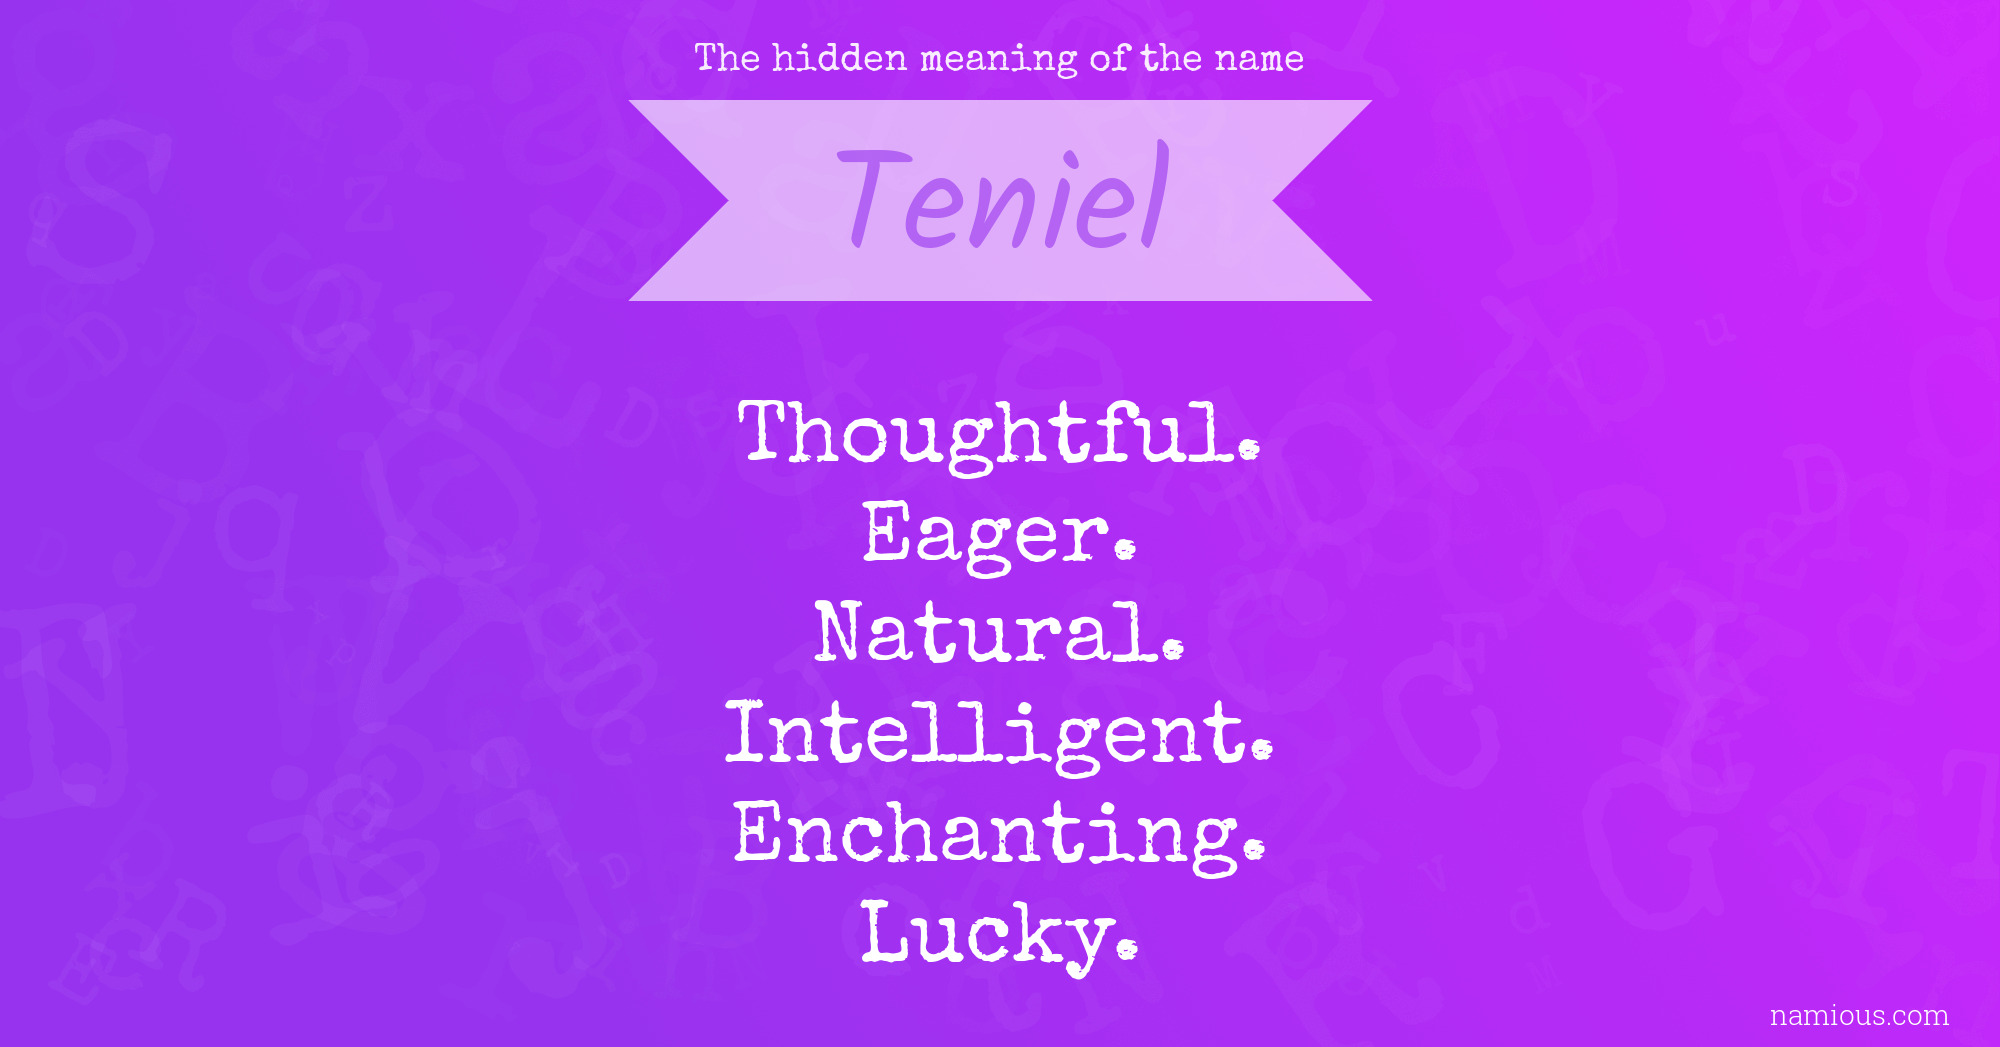 The hidden meaning of the name Teniel